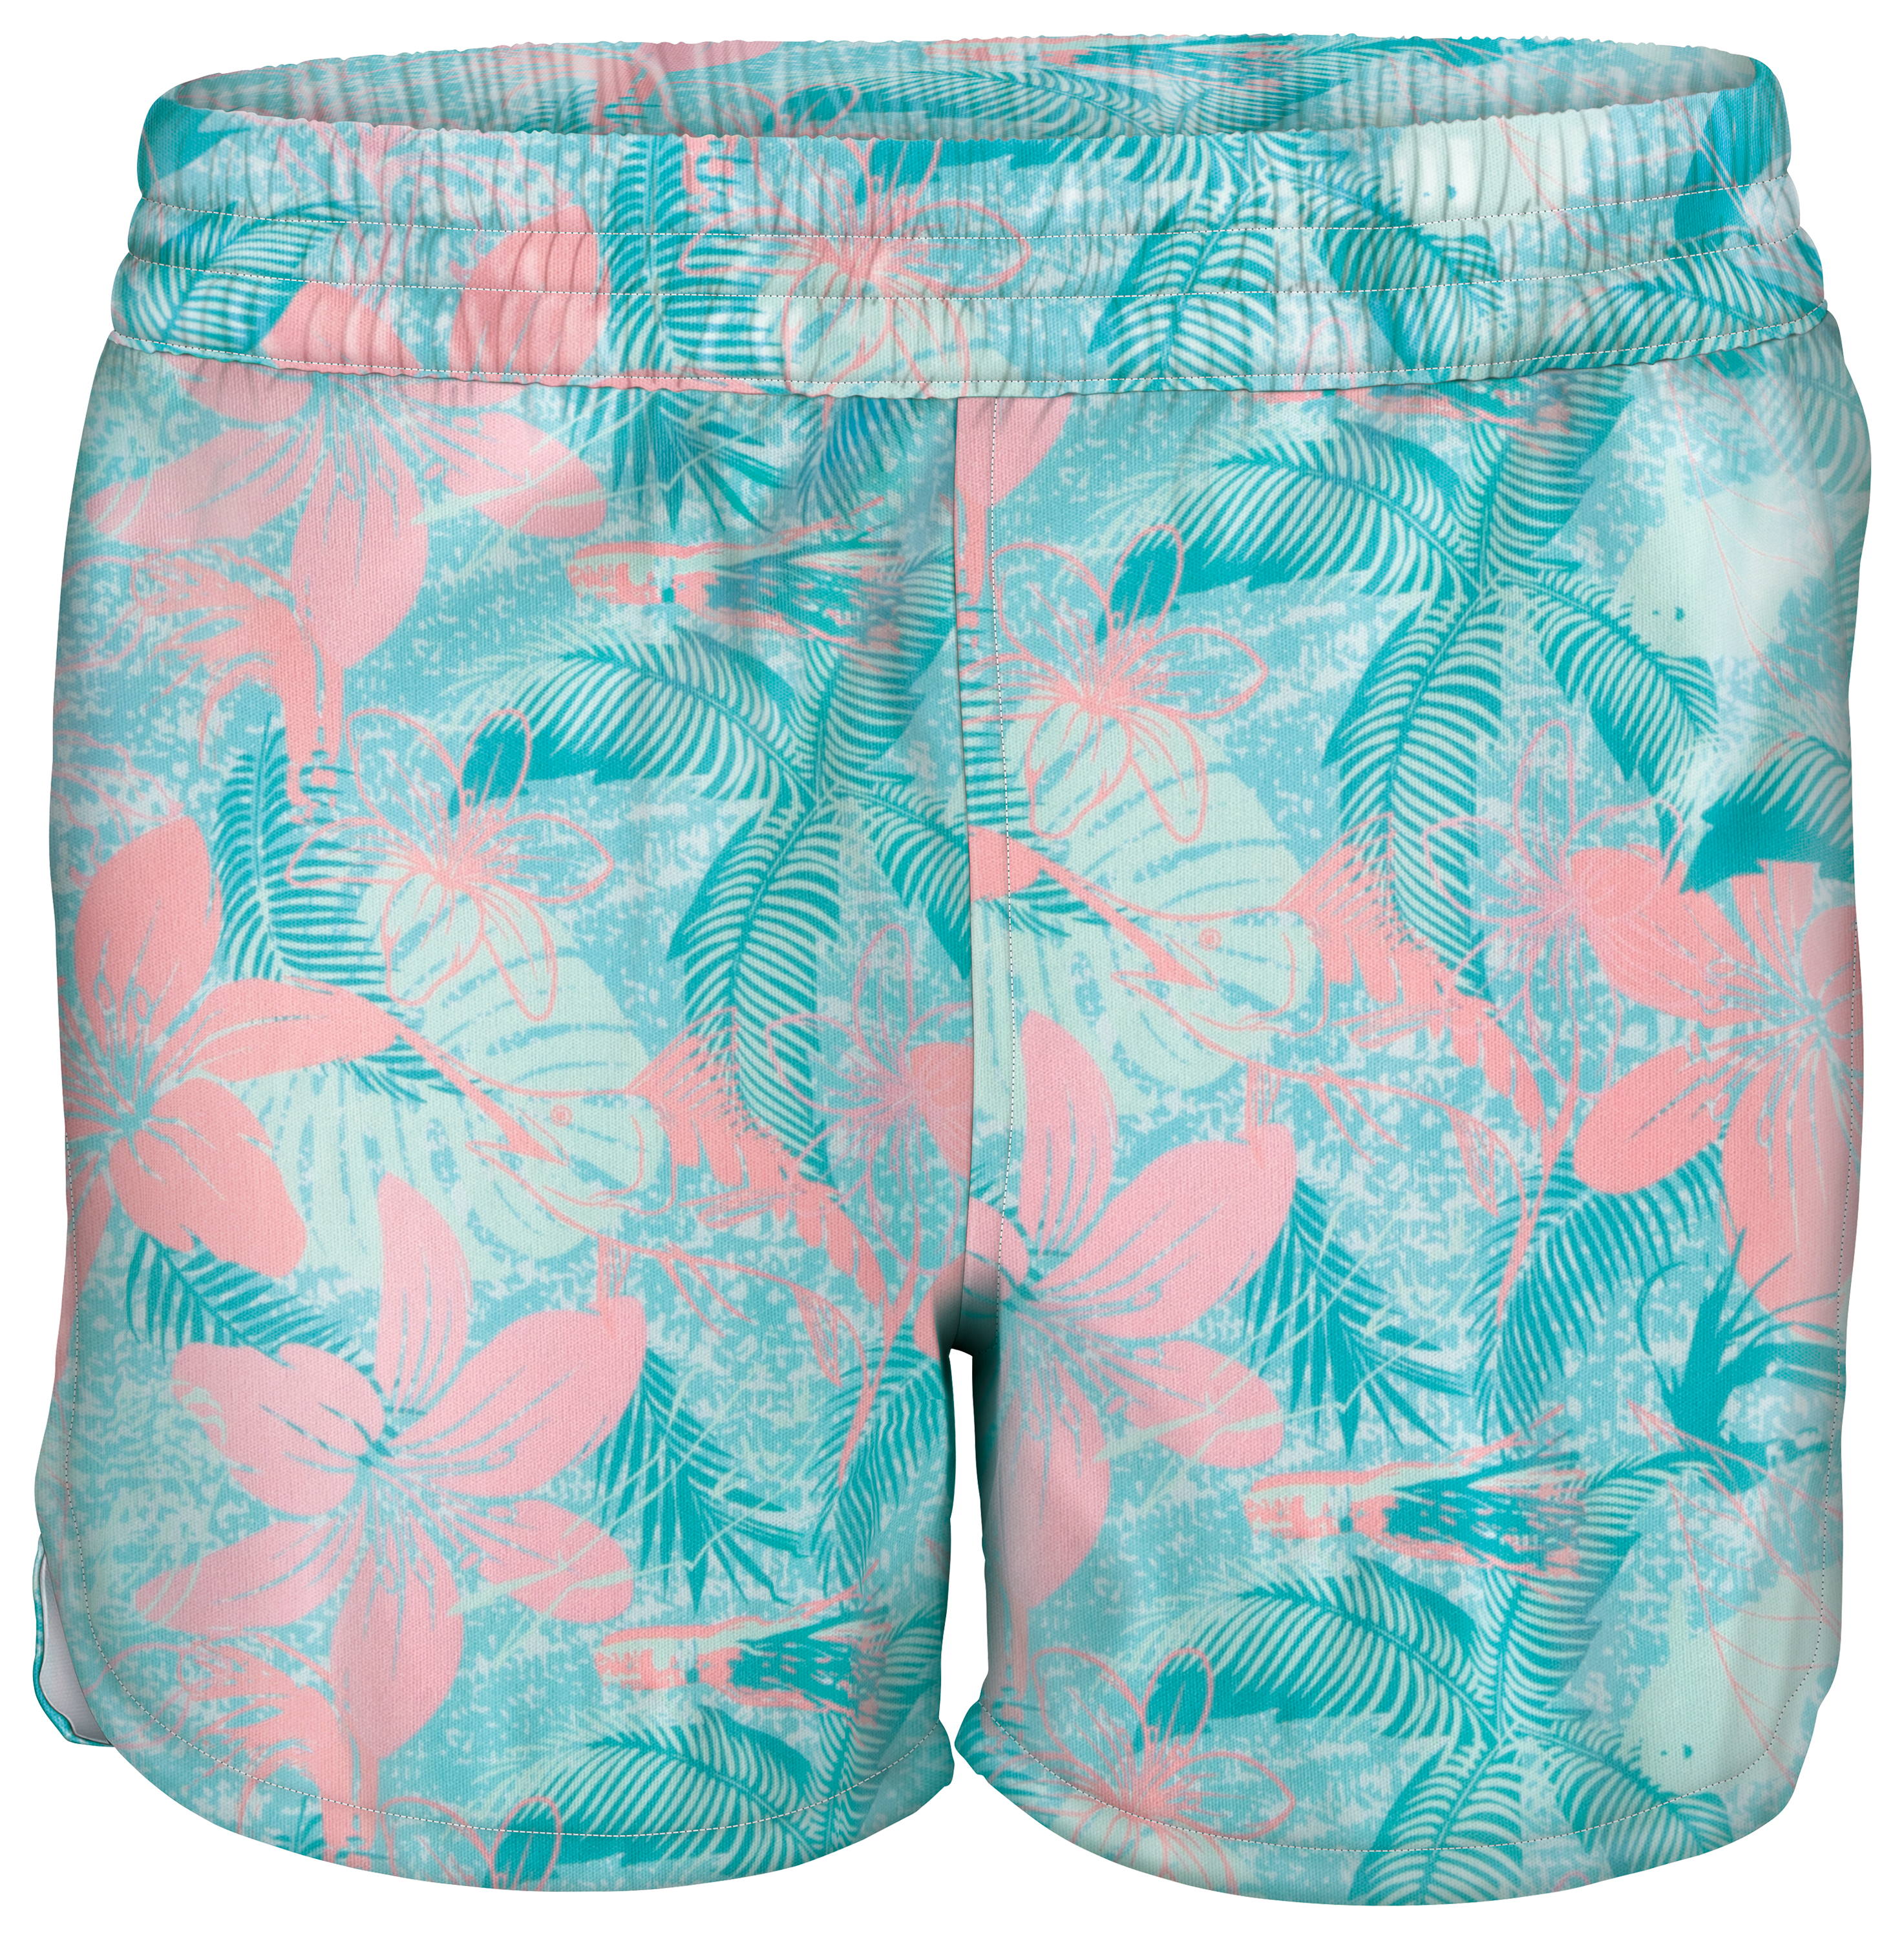 World Wide Sportsman Charter Pull-On Shorts for Girls - Tropical Fish - S